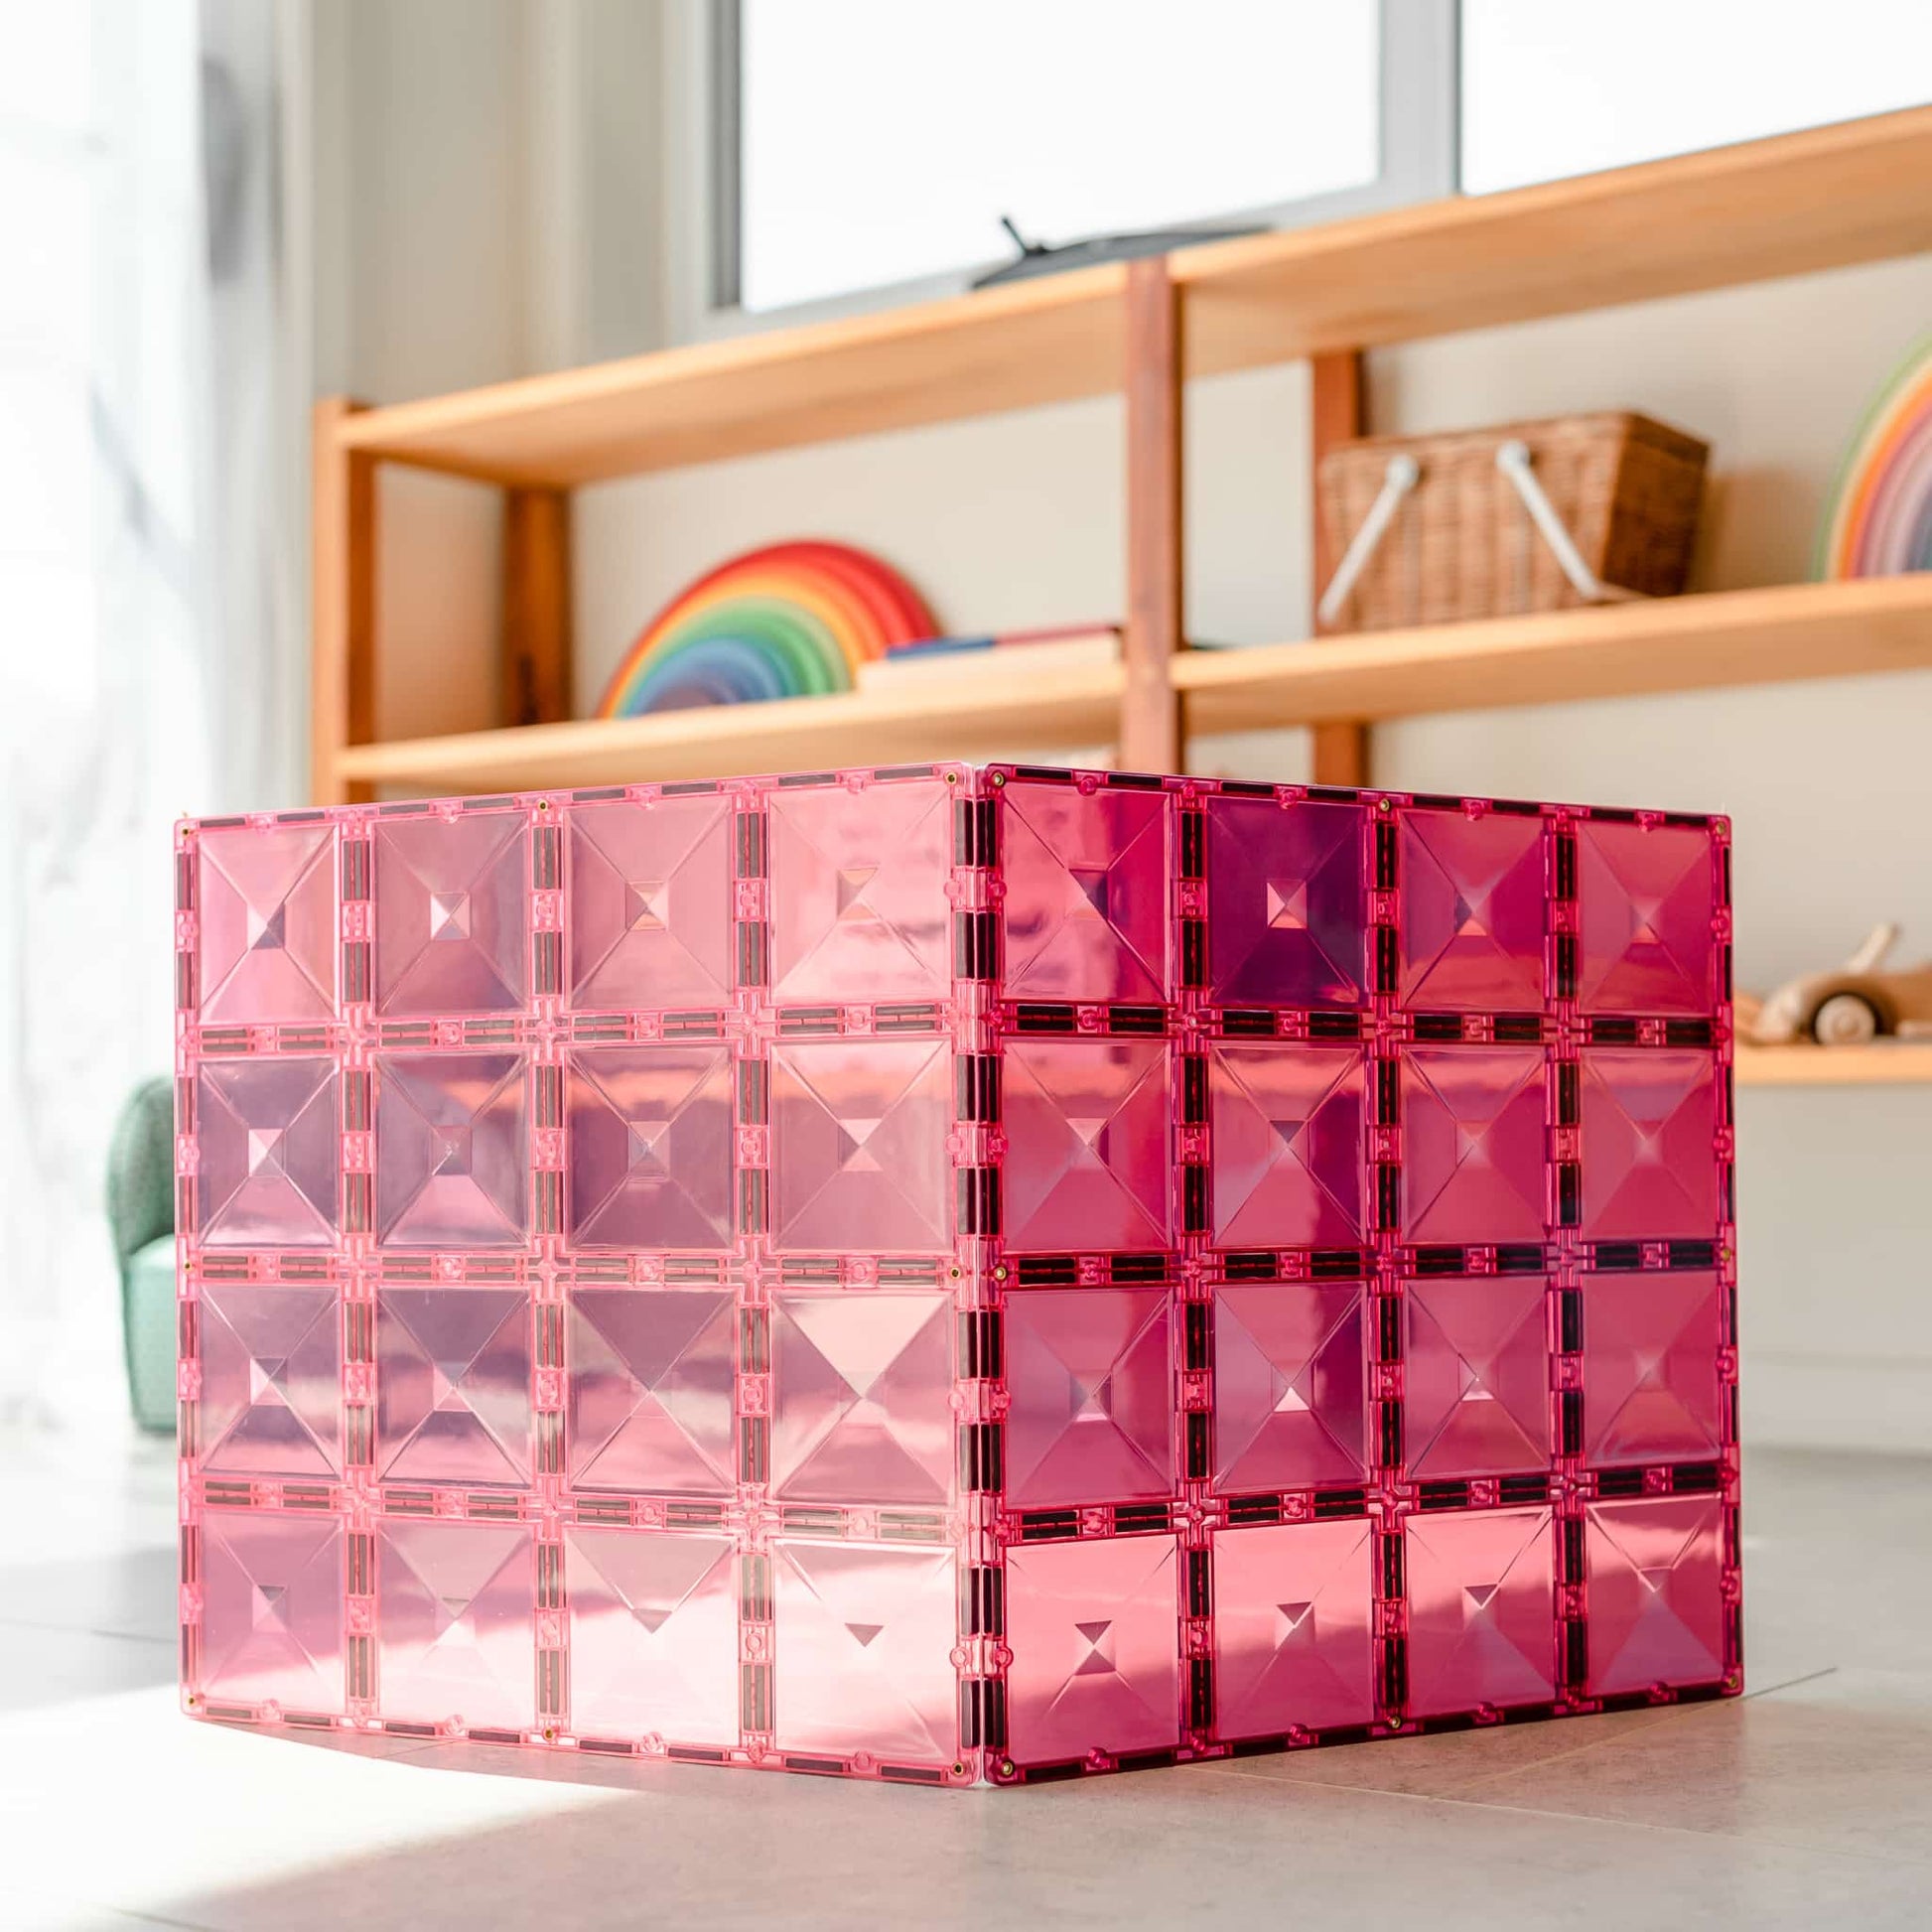 Connetix Tiles | 2 Piece Base Plate Pack - Pink & Berry available at Bear & Moo